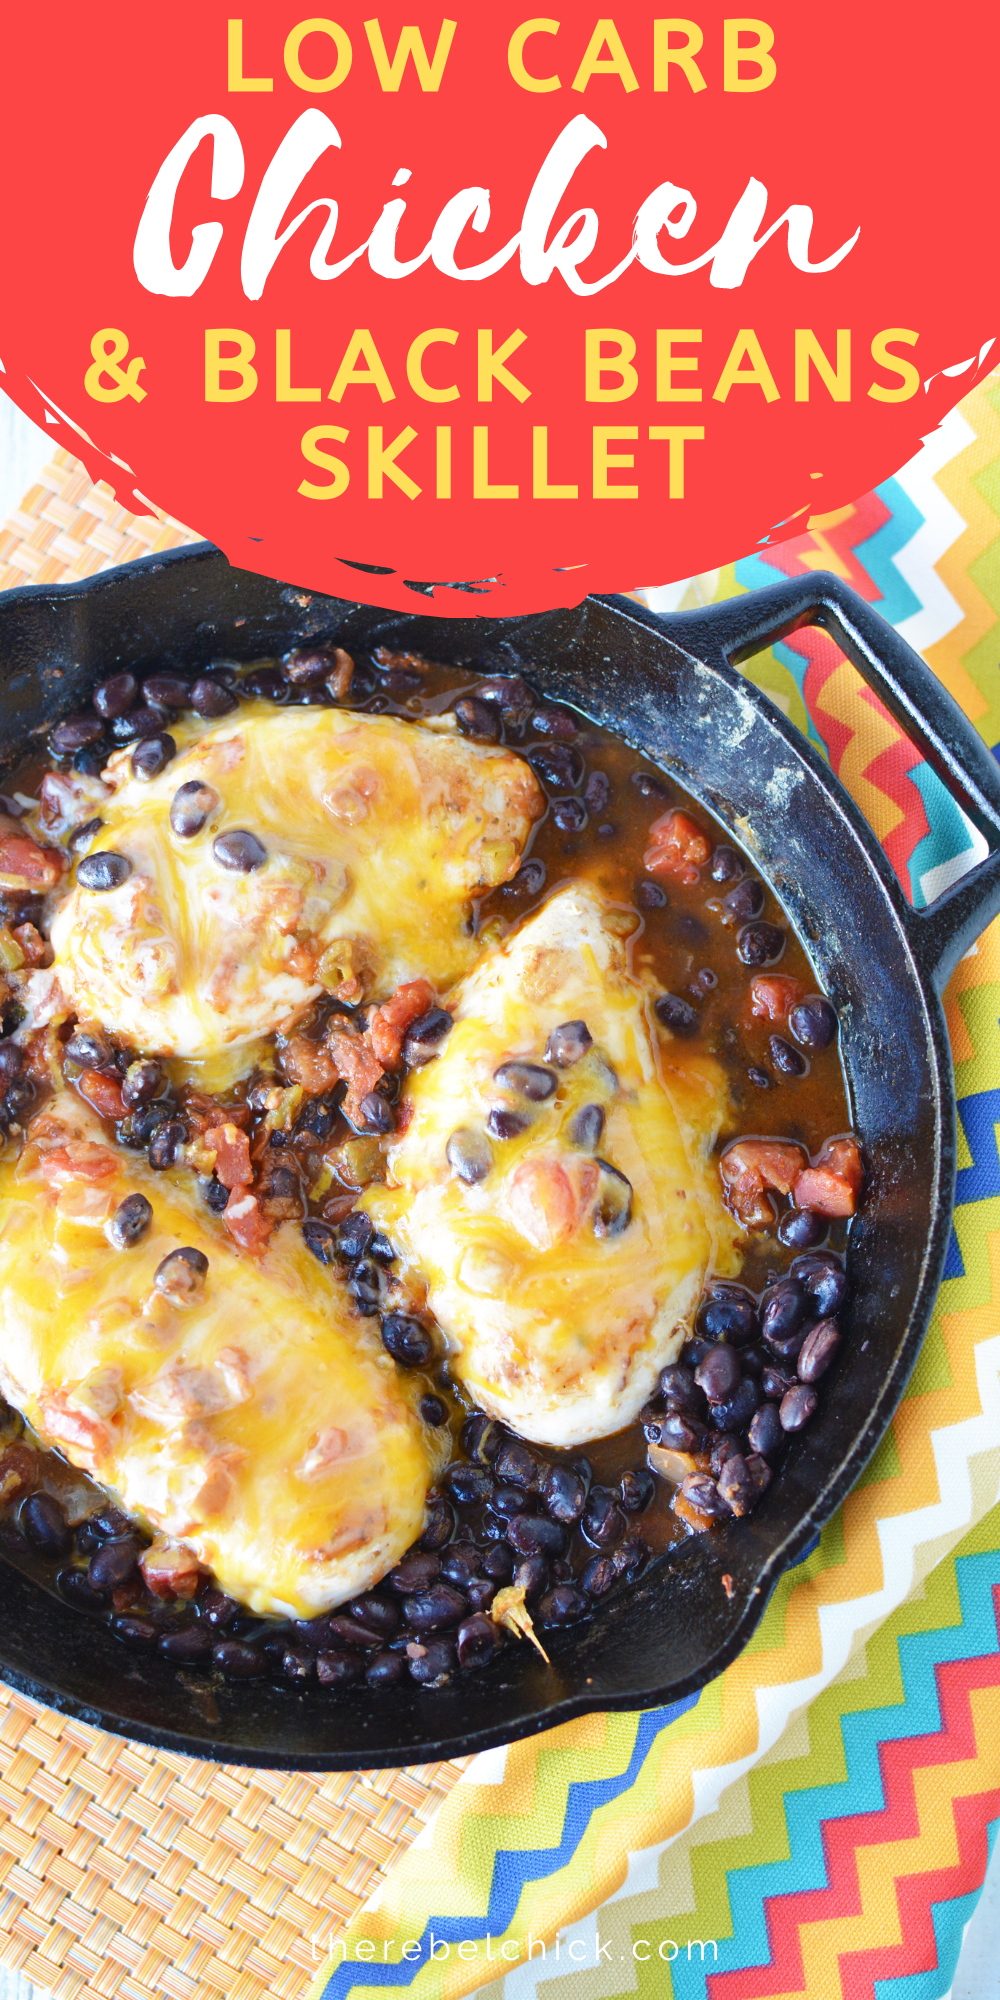 Low Carb Chicken & Black Beans Skillet Recipe